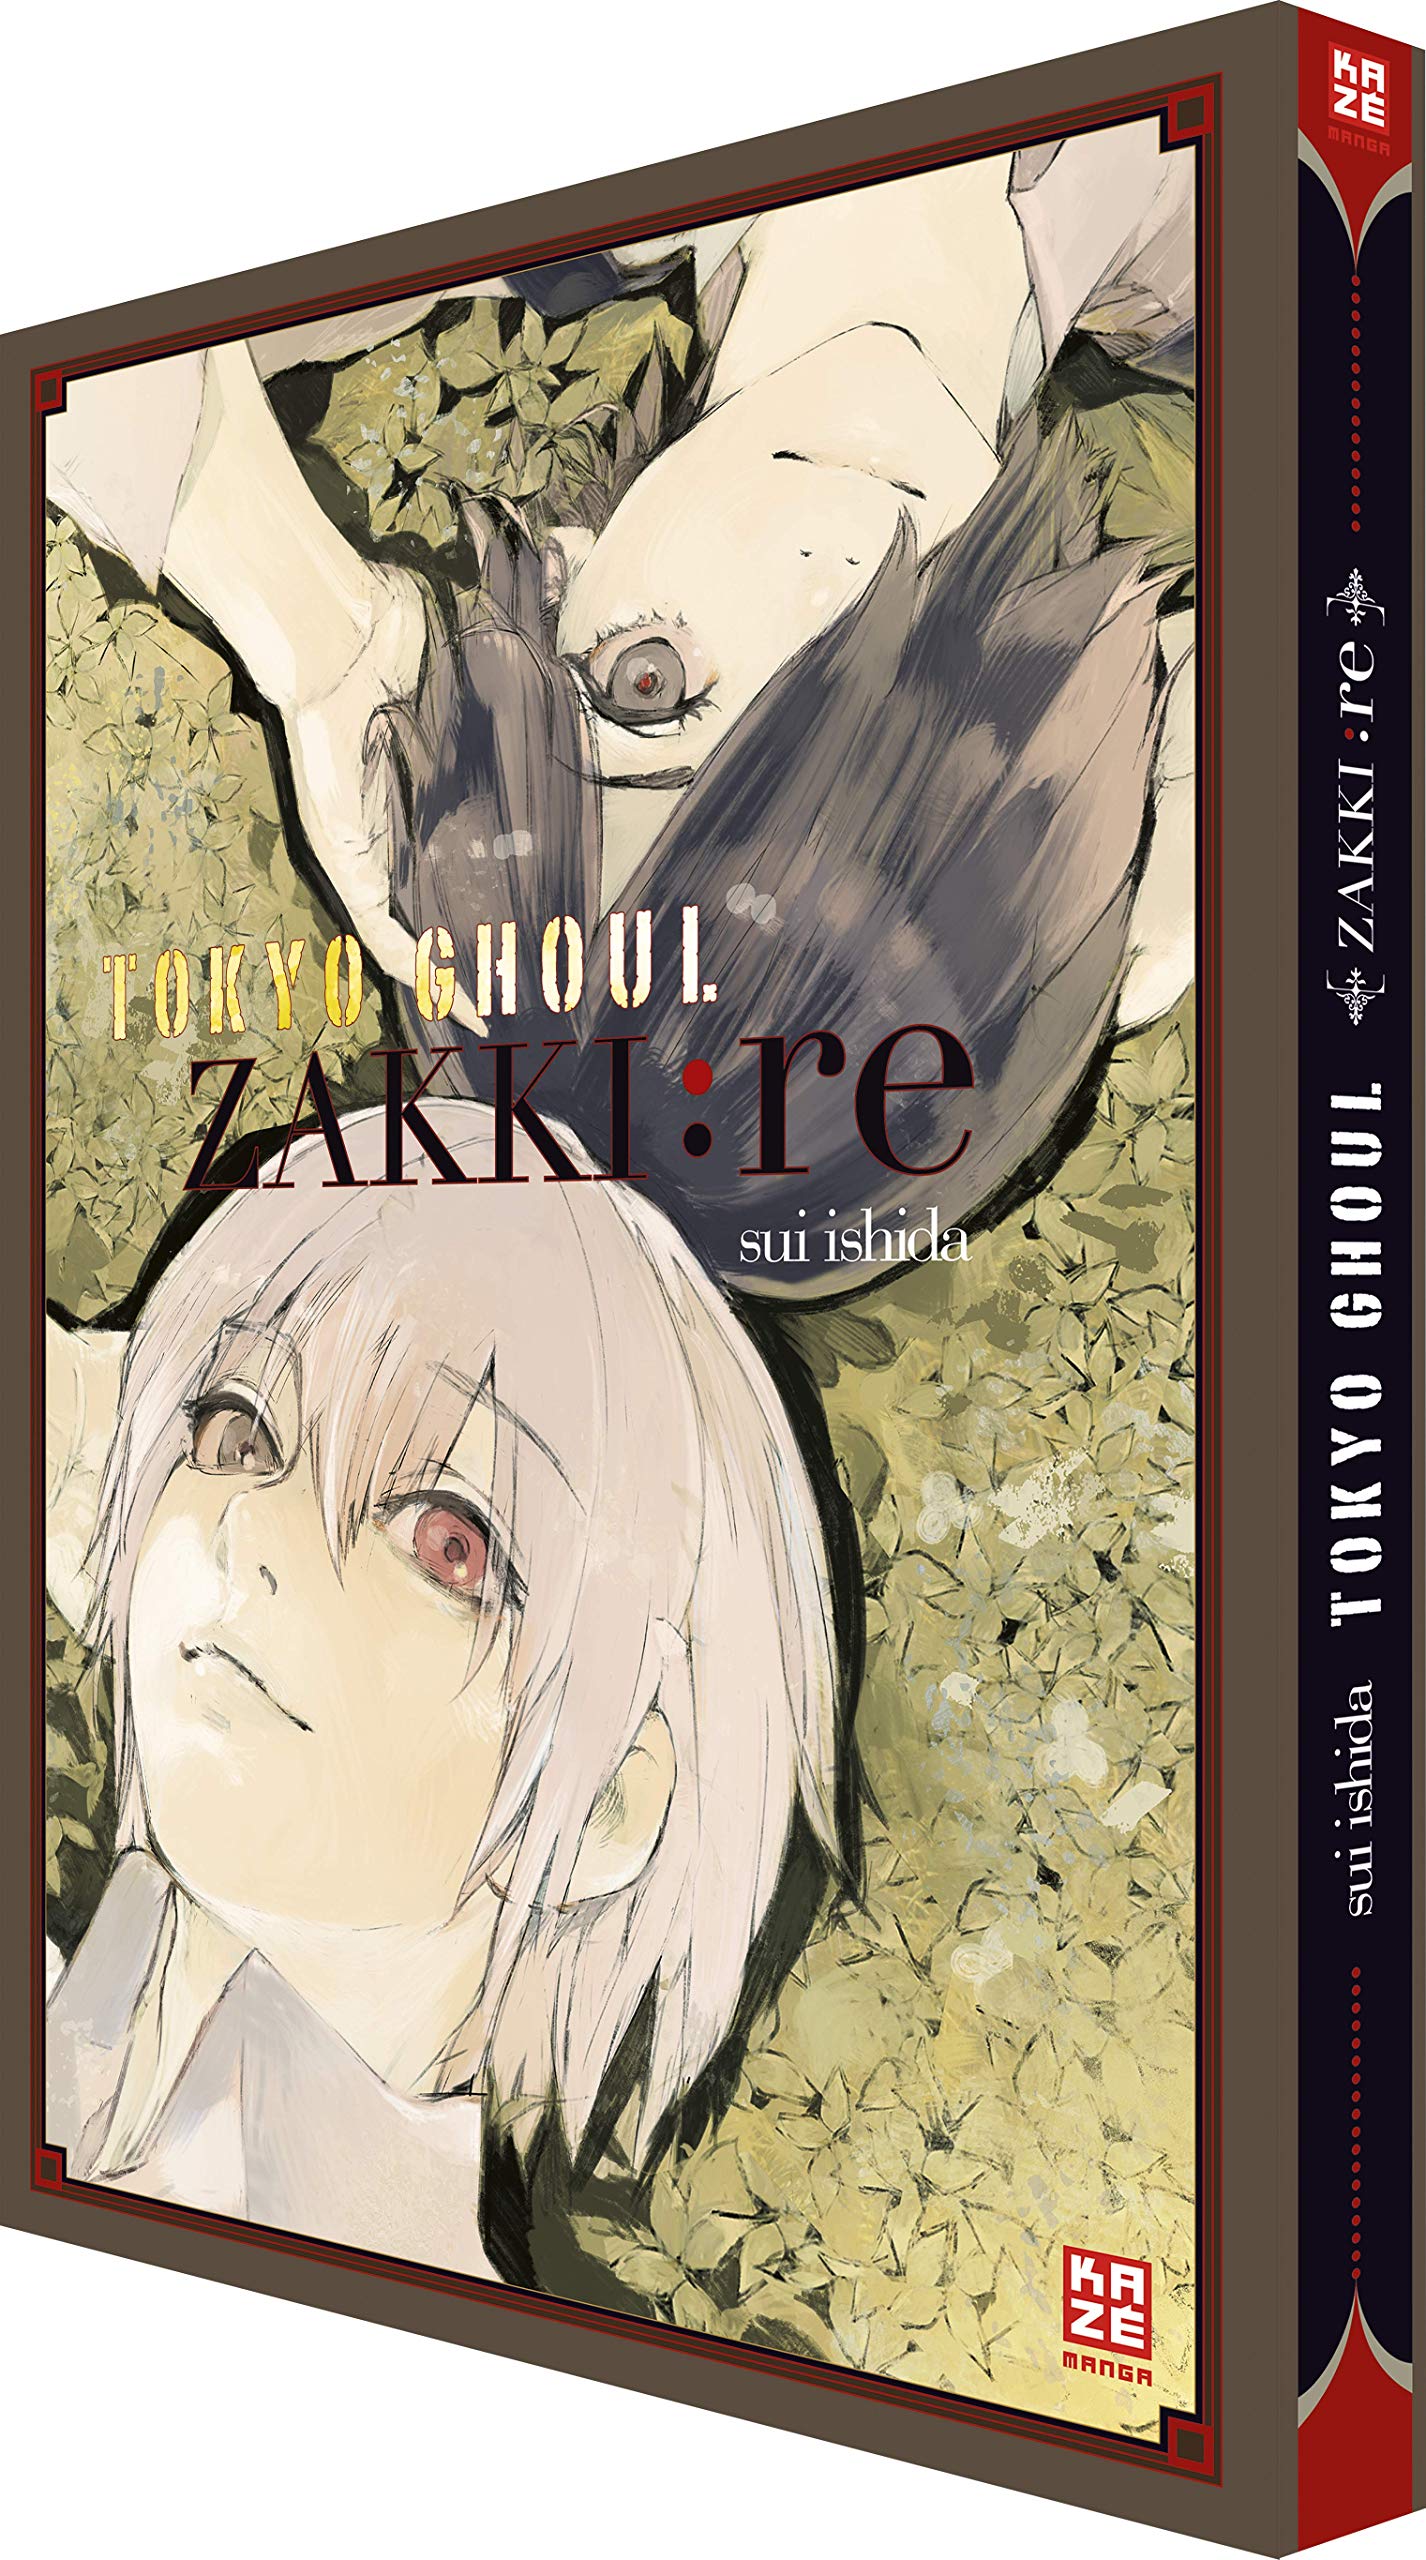 Tokyo Ghoul Anime vs Manga: Which One Is Better?